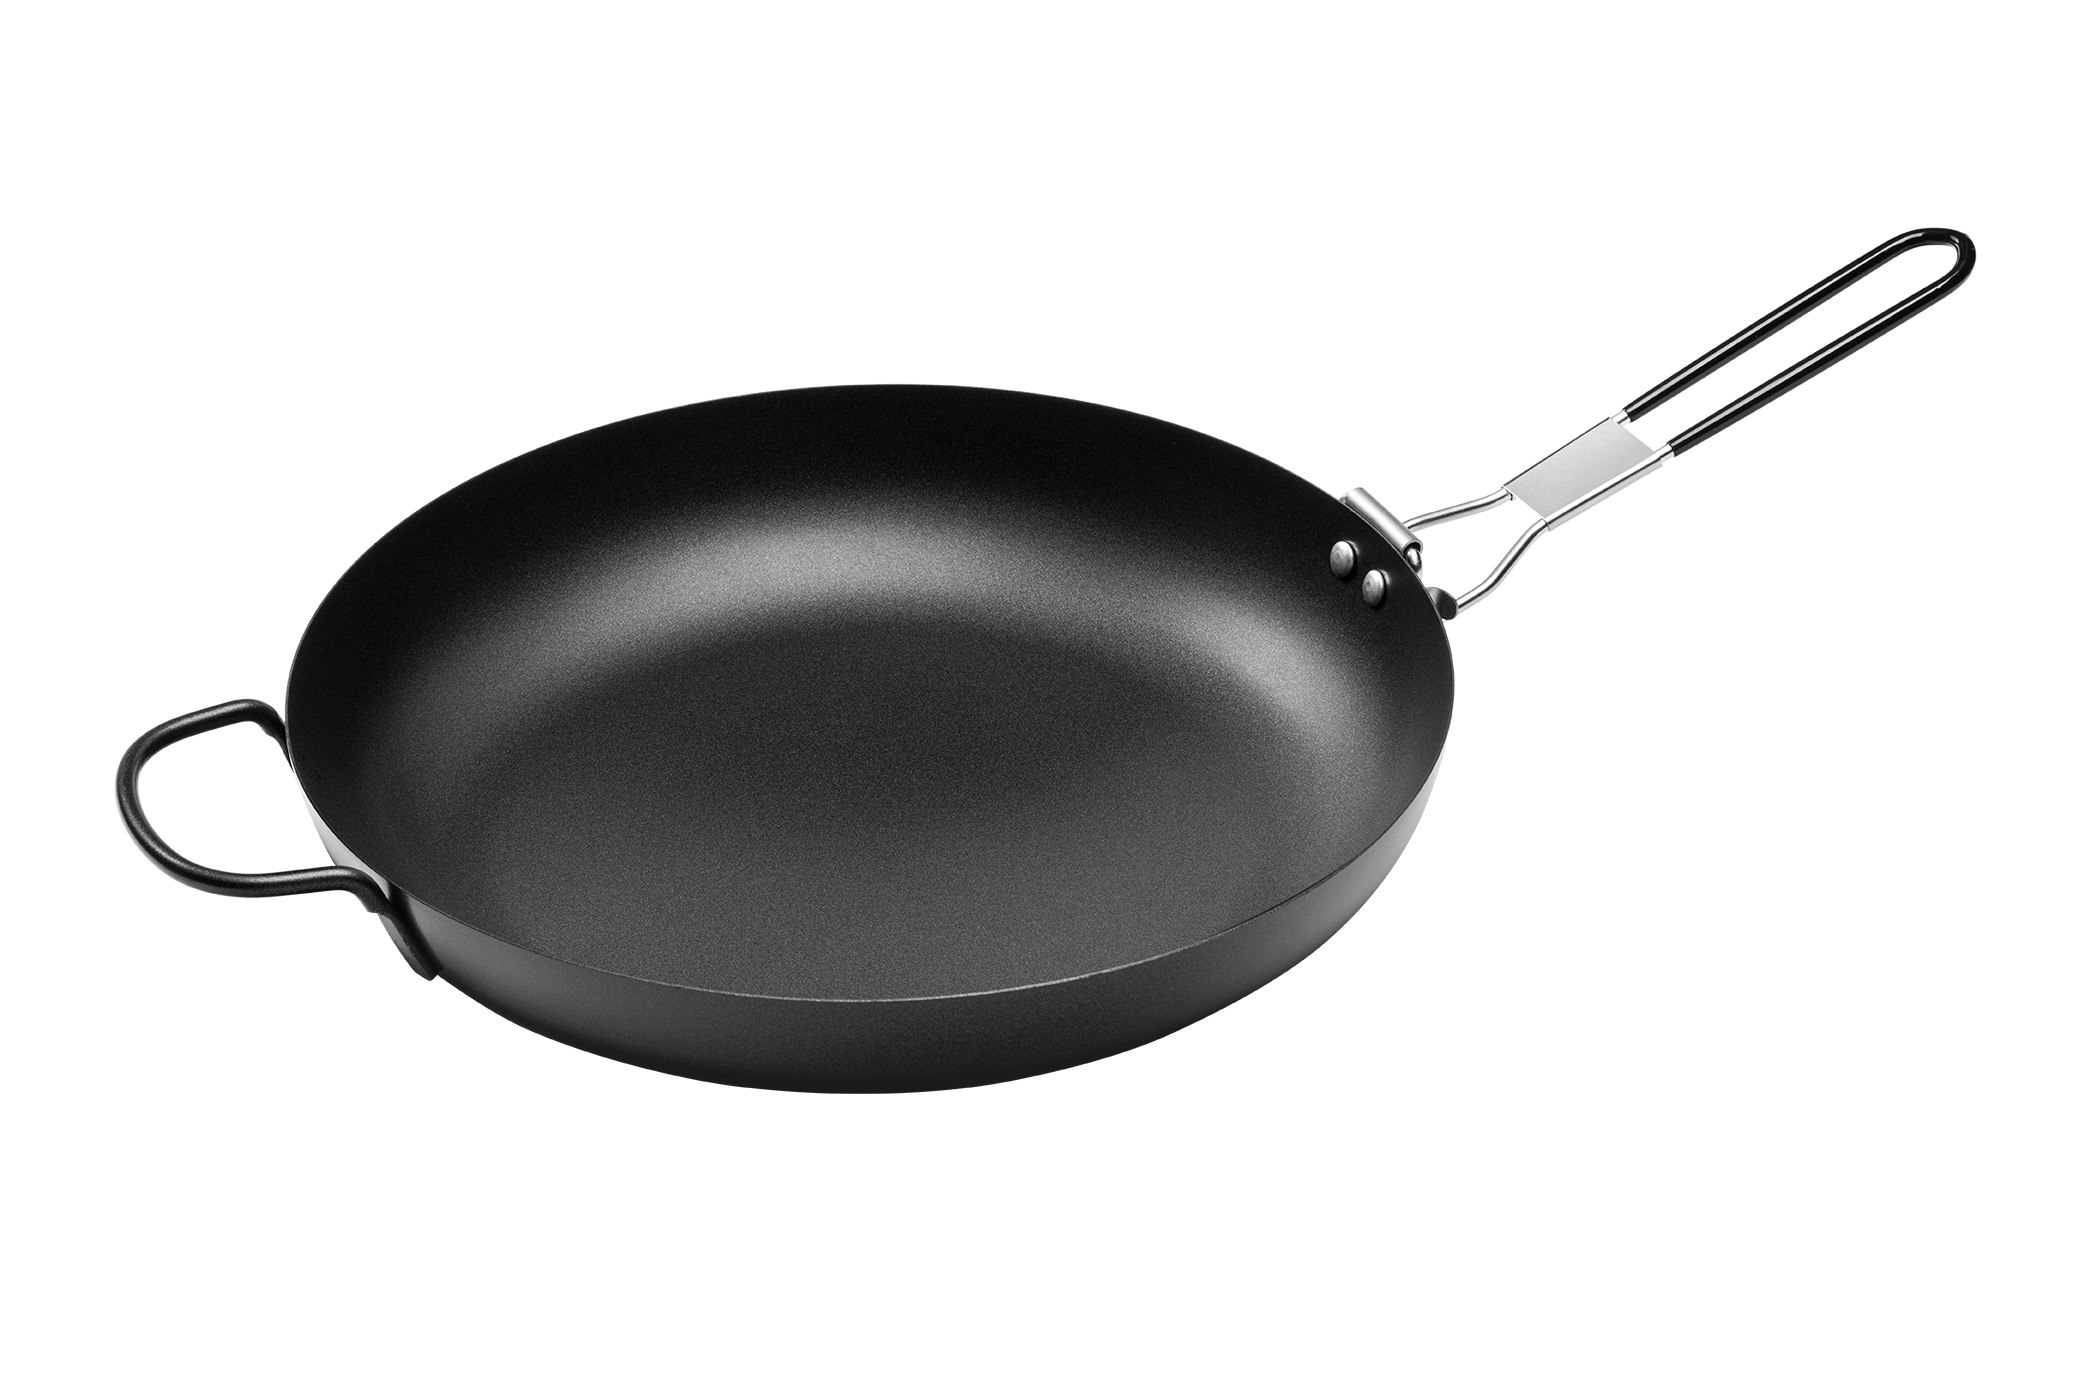 Alpine Mountain Gear 12 Inch Non-Stick Fry Pan with Folding Handle for Camping  